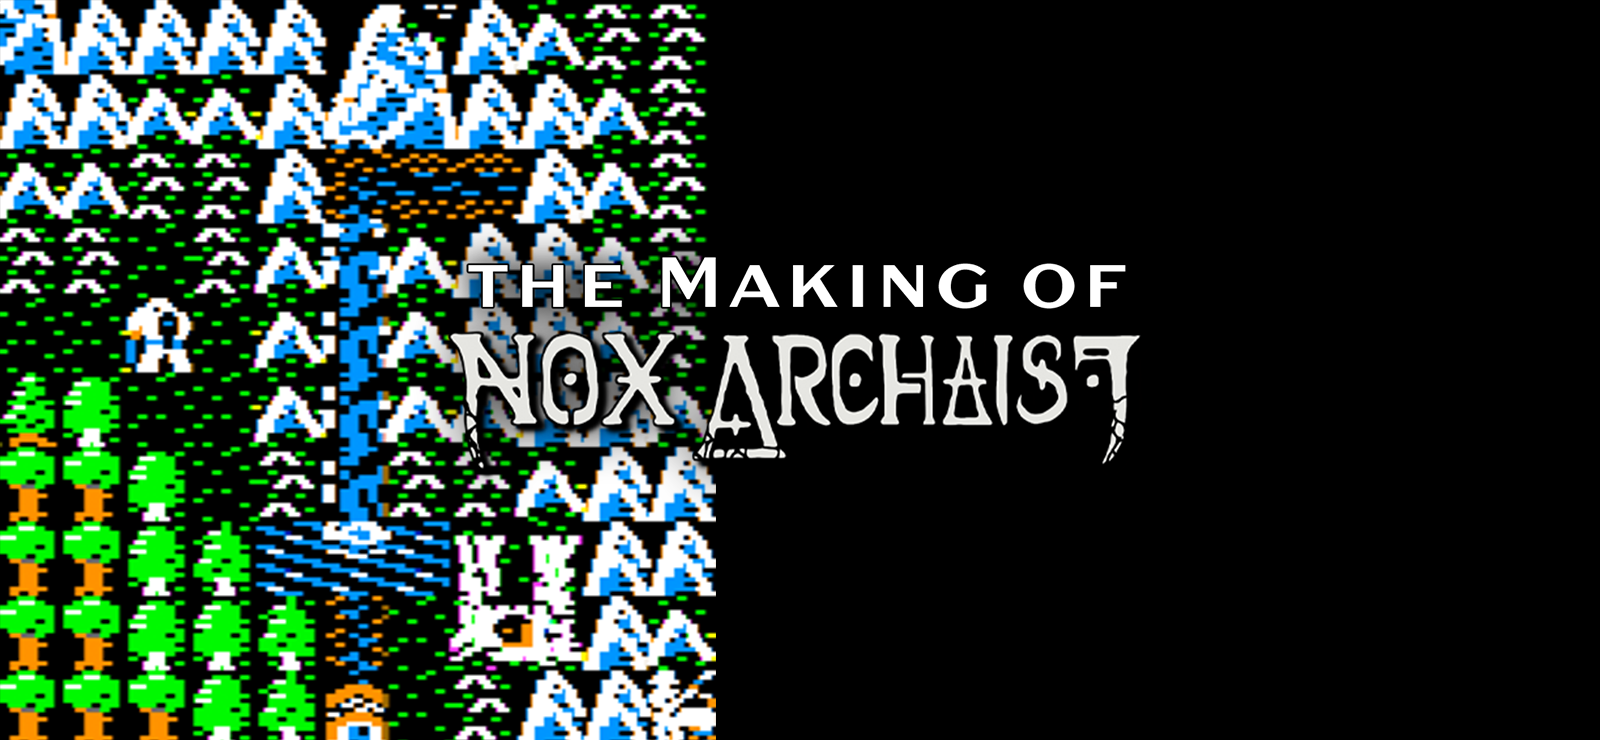 The Making Of Nox Archaist